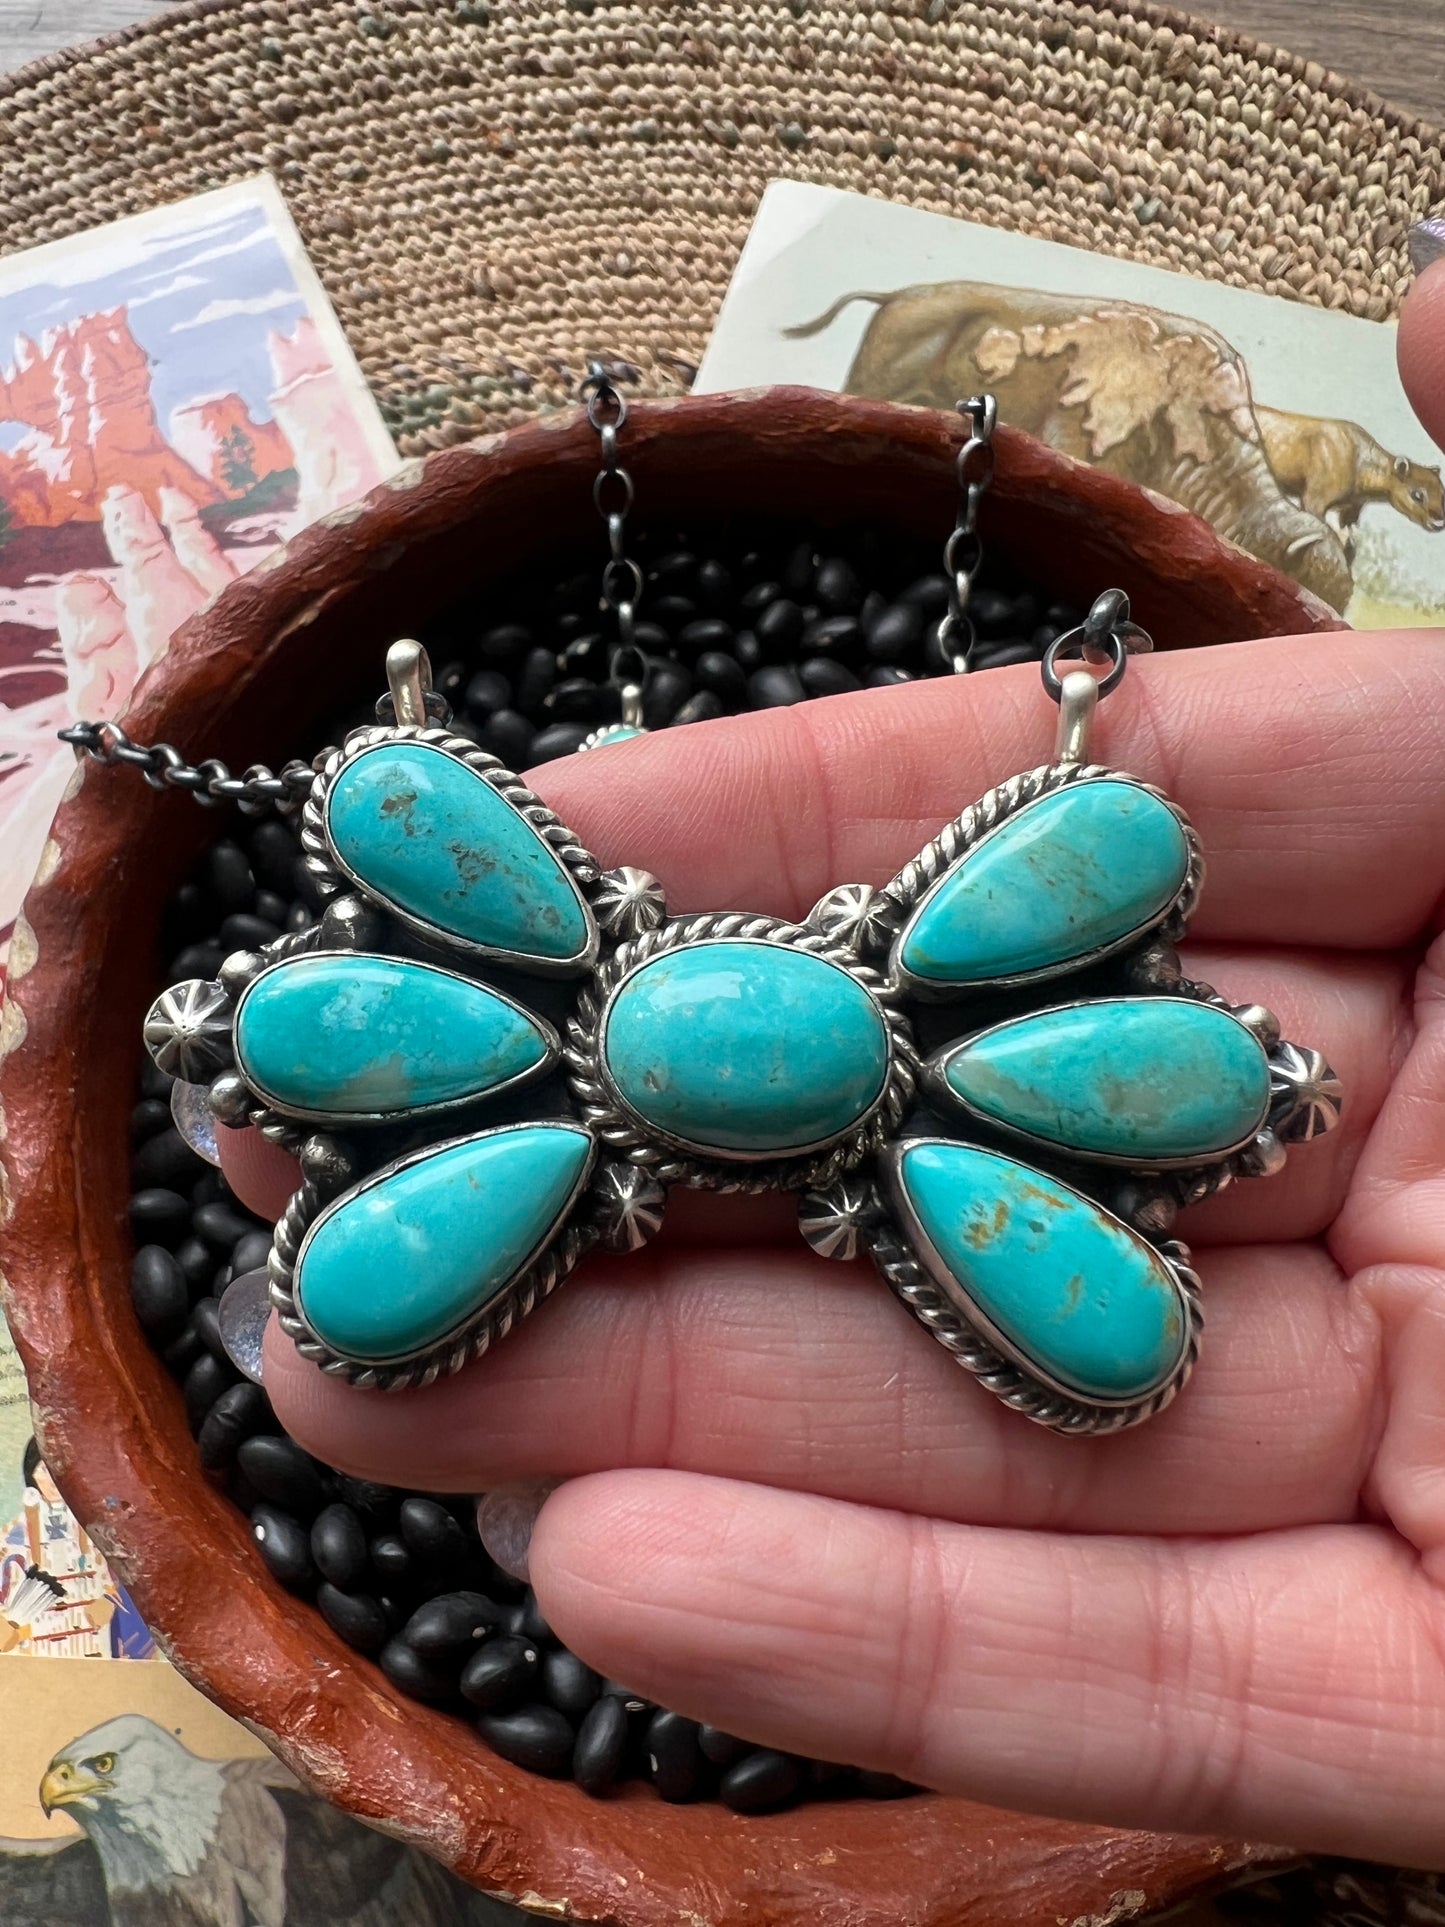 Turquoise Bow Necklace